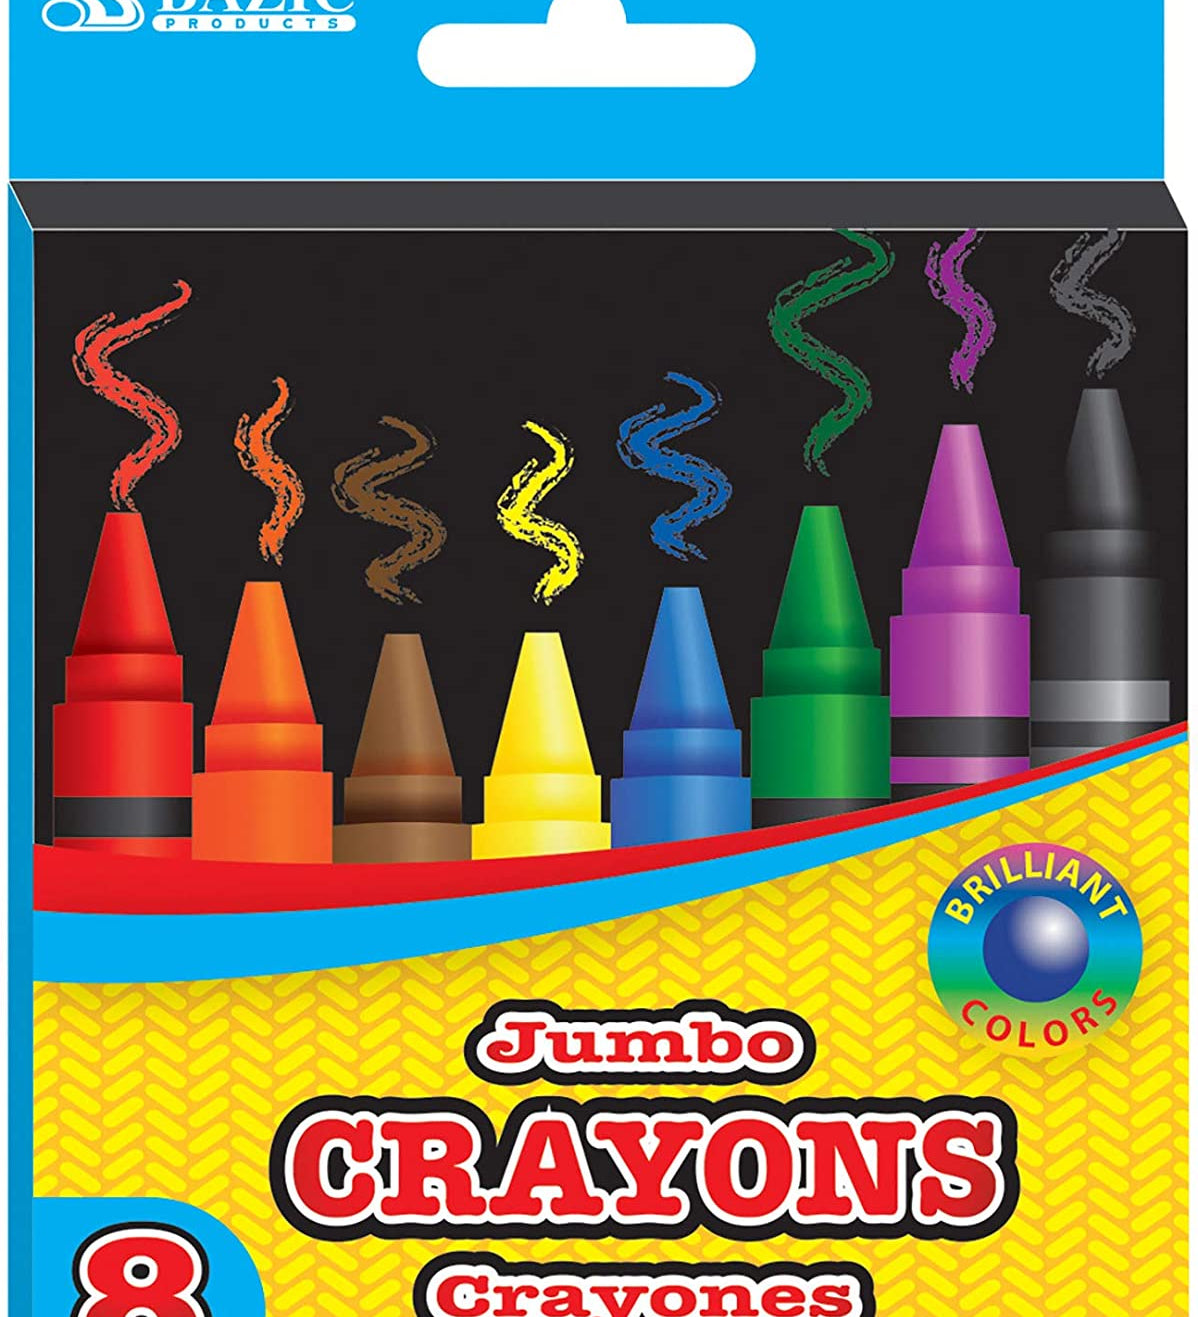 BAZIC Crayons Super Jumbo 8 Color, Assorted Coloring Crayon Set, Non Toxic  Drawing Crayons for School Art, Gift for Kids Artist (8/Pack), 1-Pack